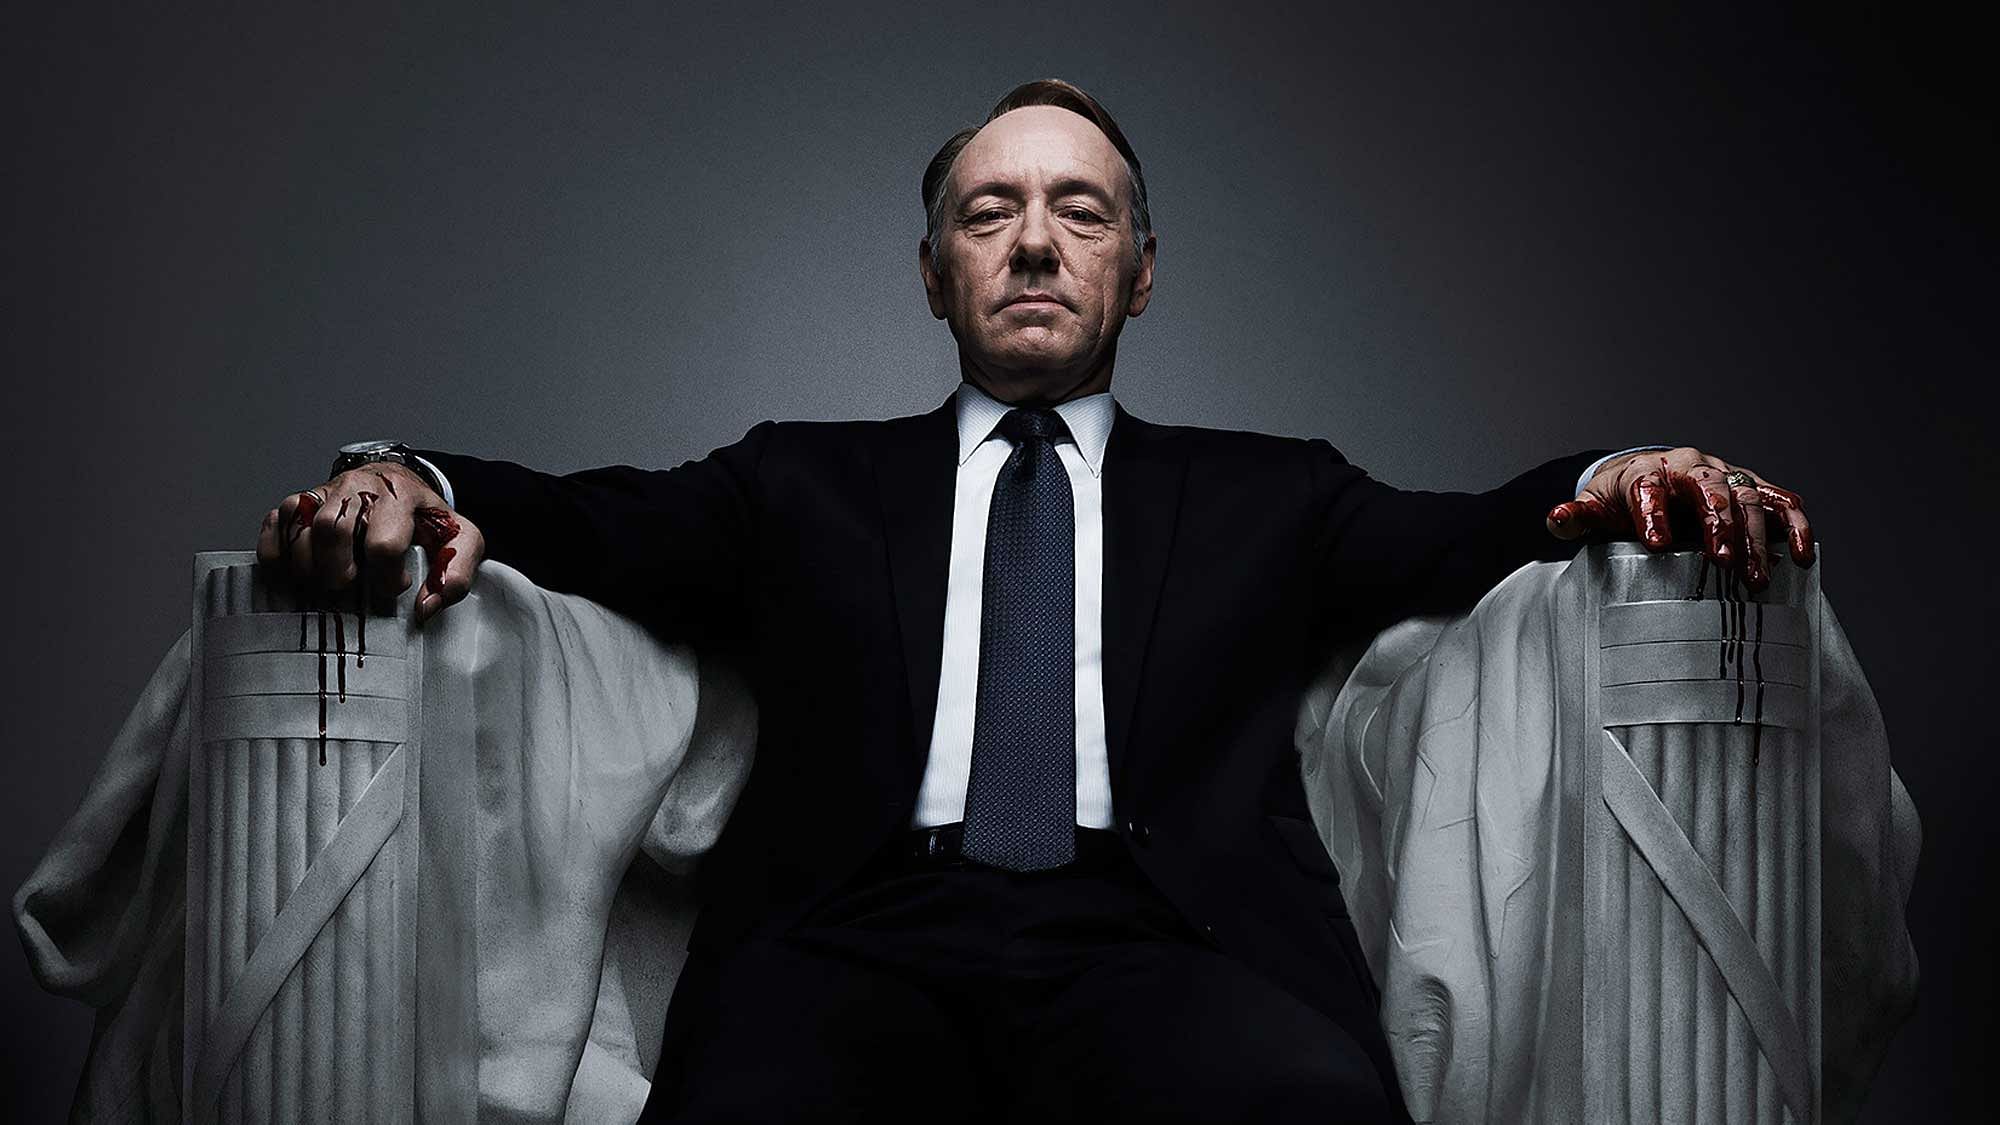 Kevin Spacey in House of Cards. (Photo: Netflix)